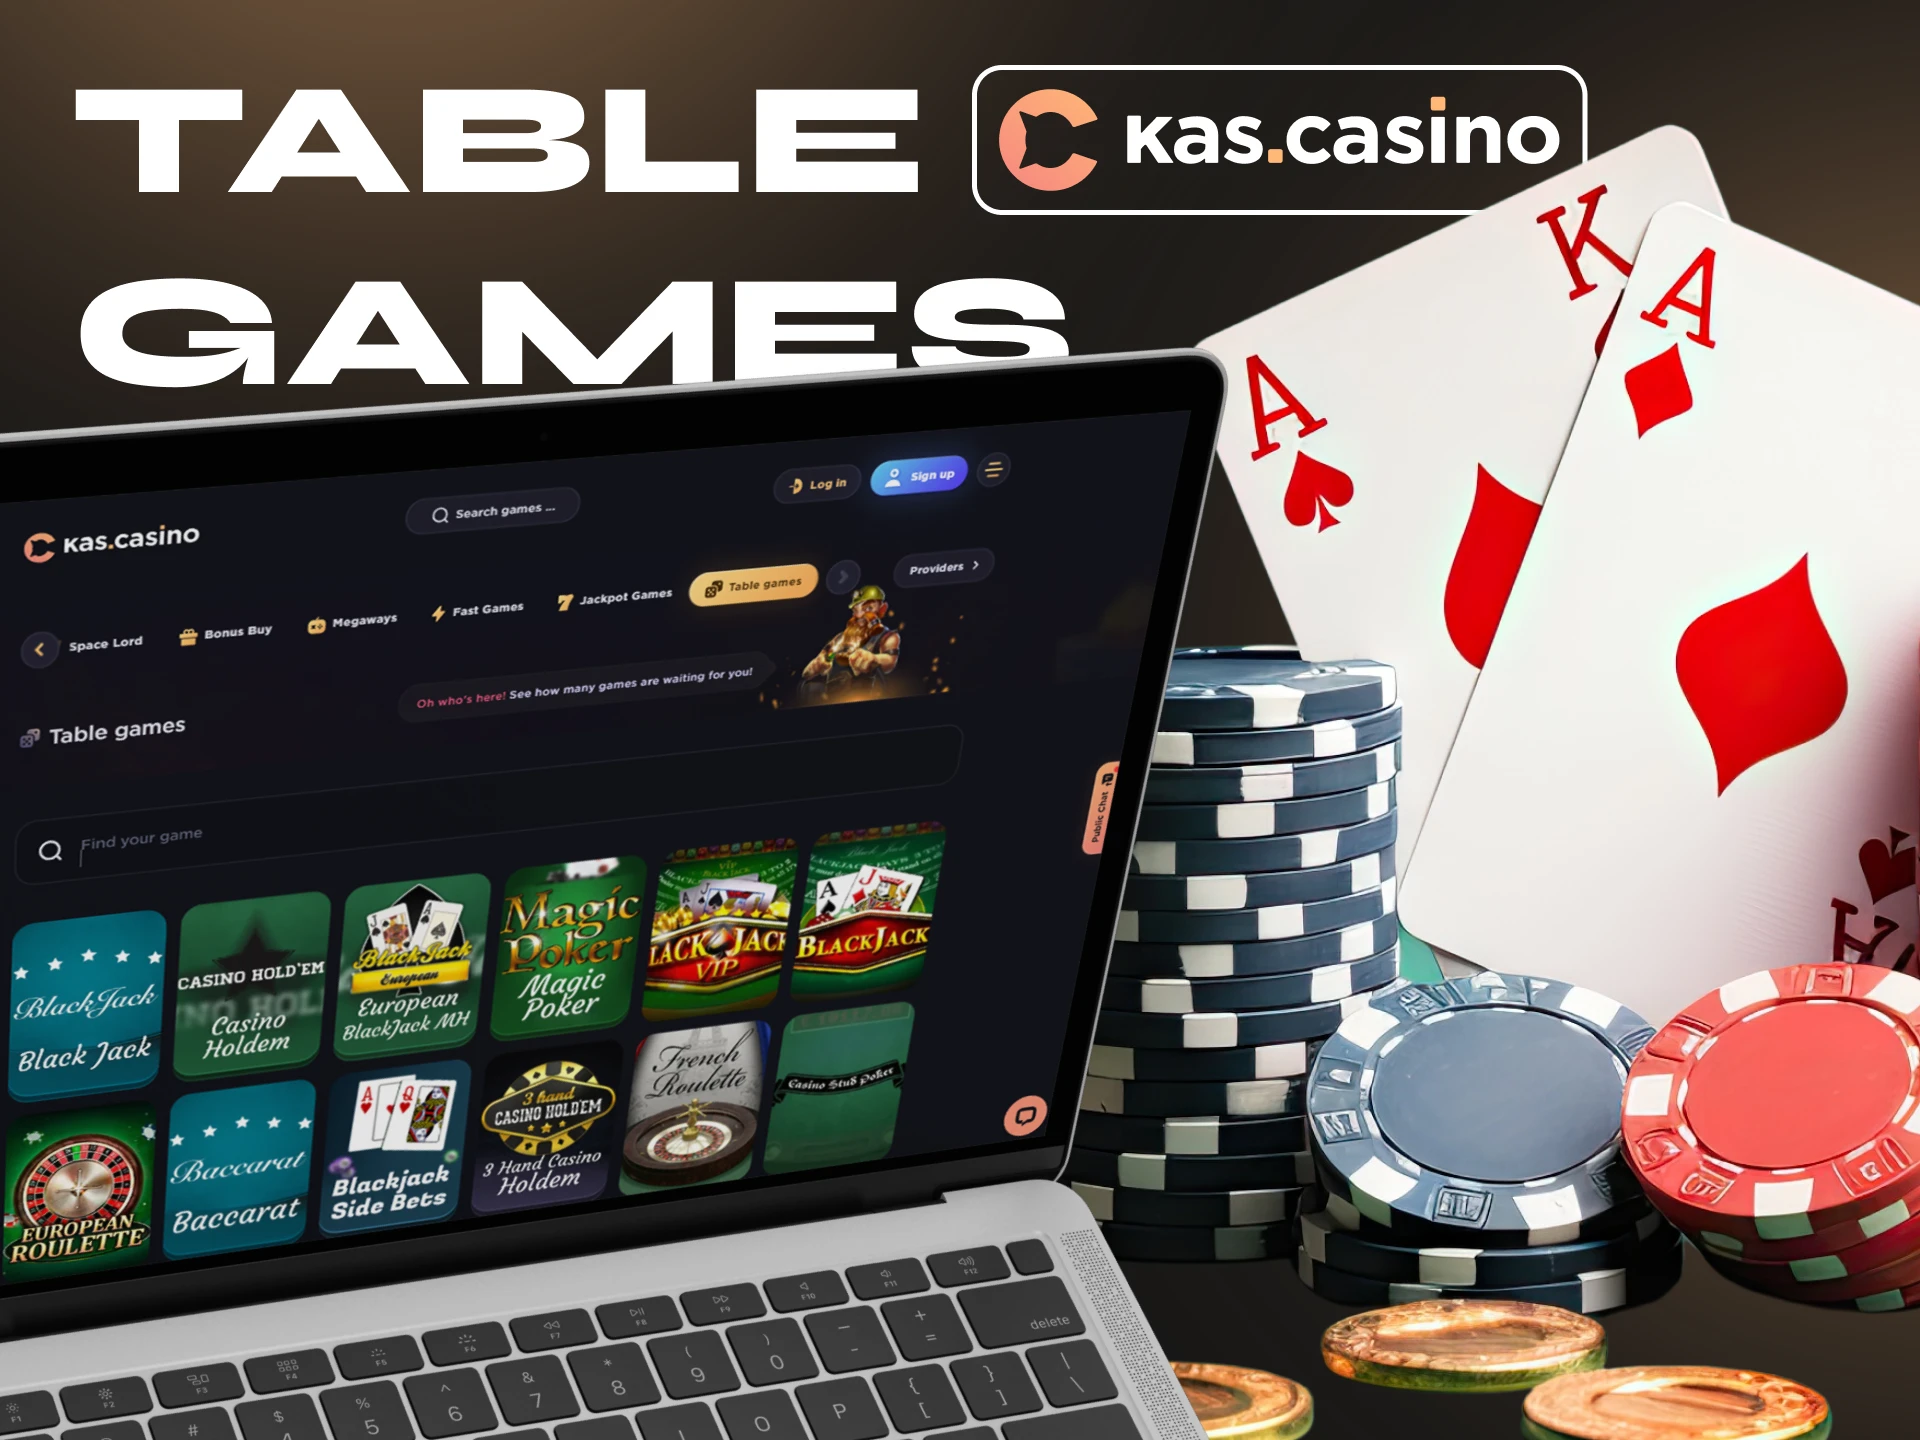 Play table games with cryptocurrency at Kas Casino.